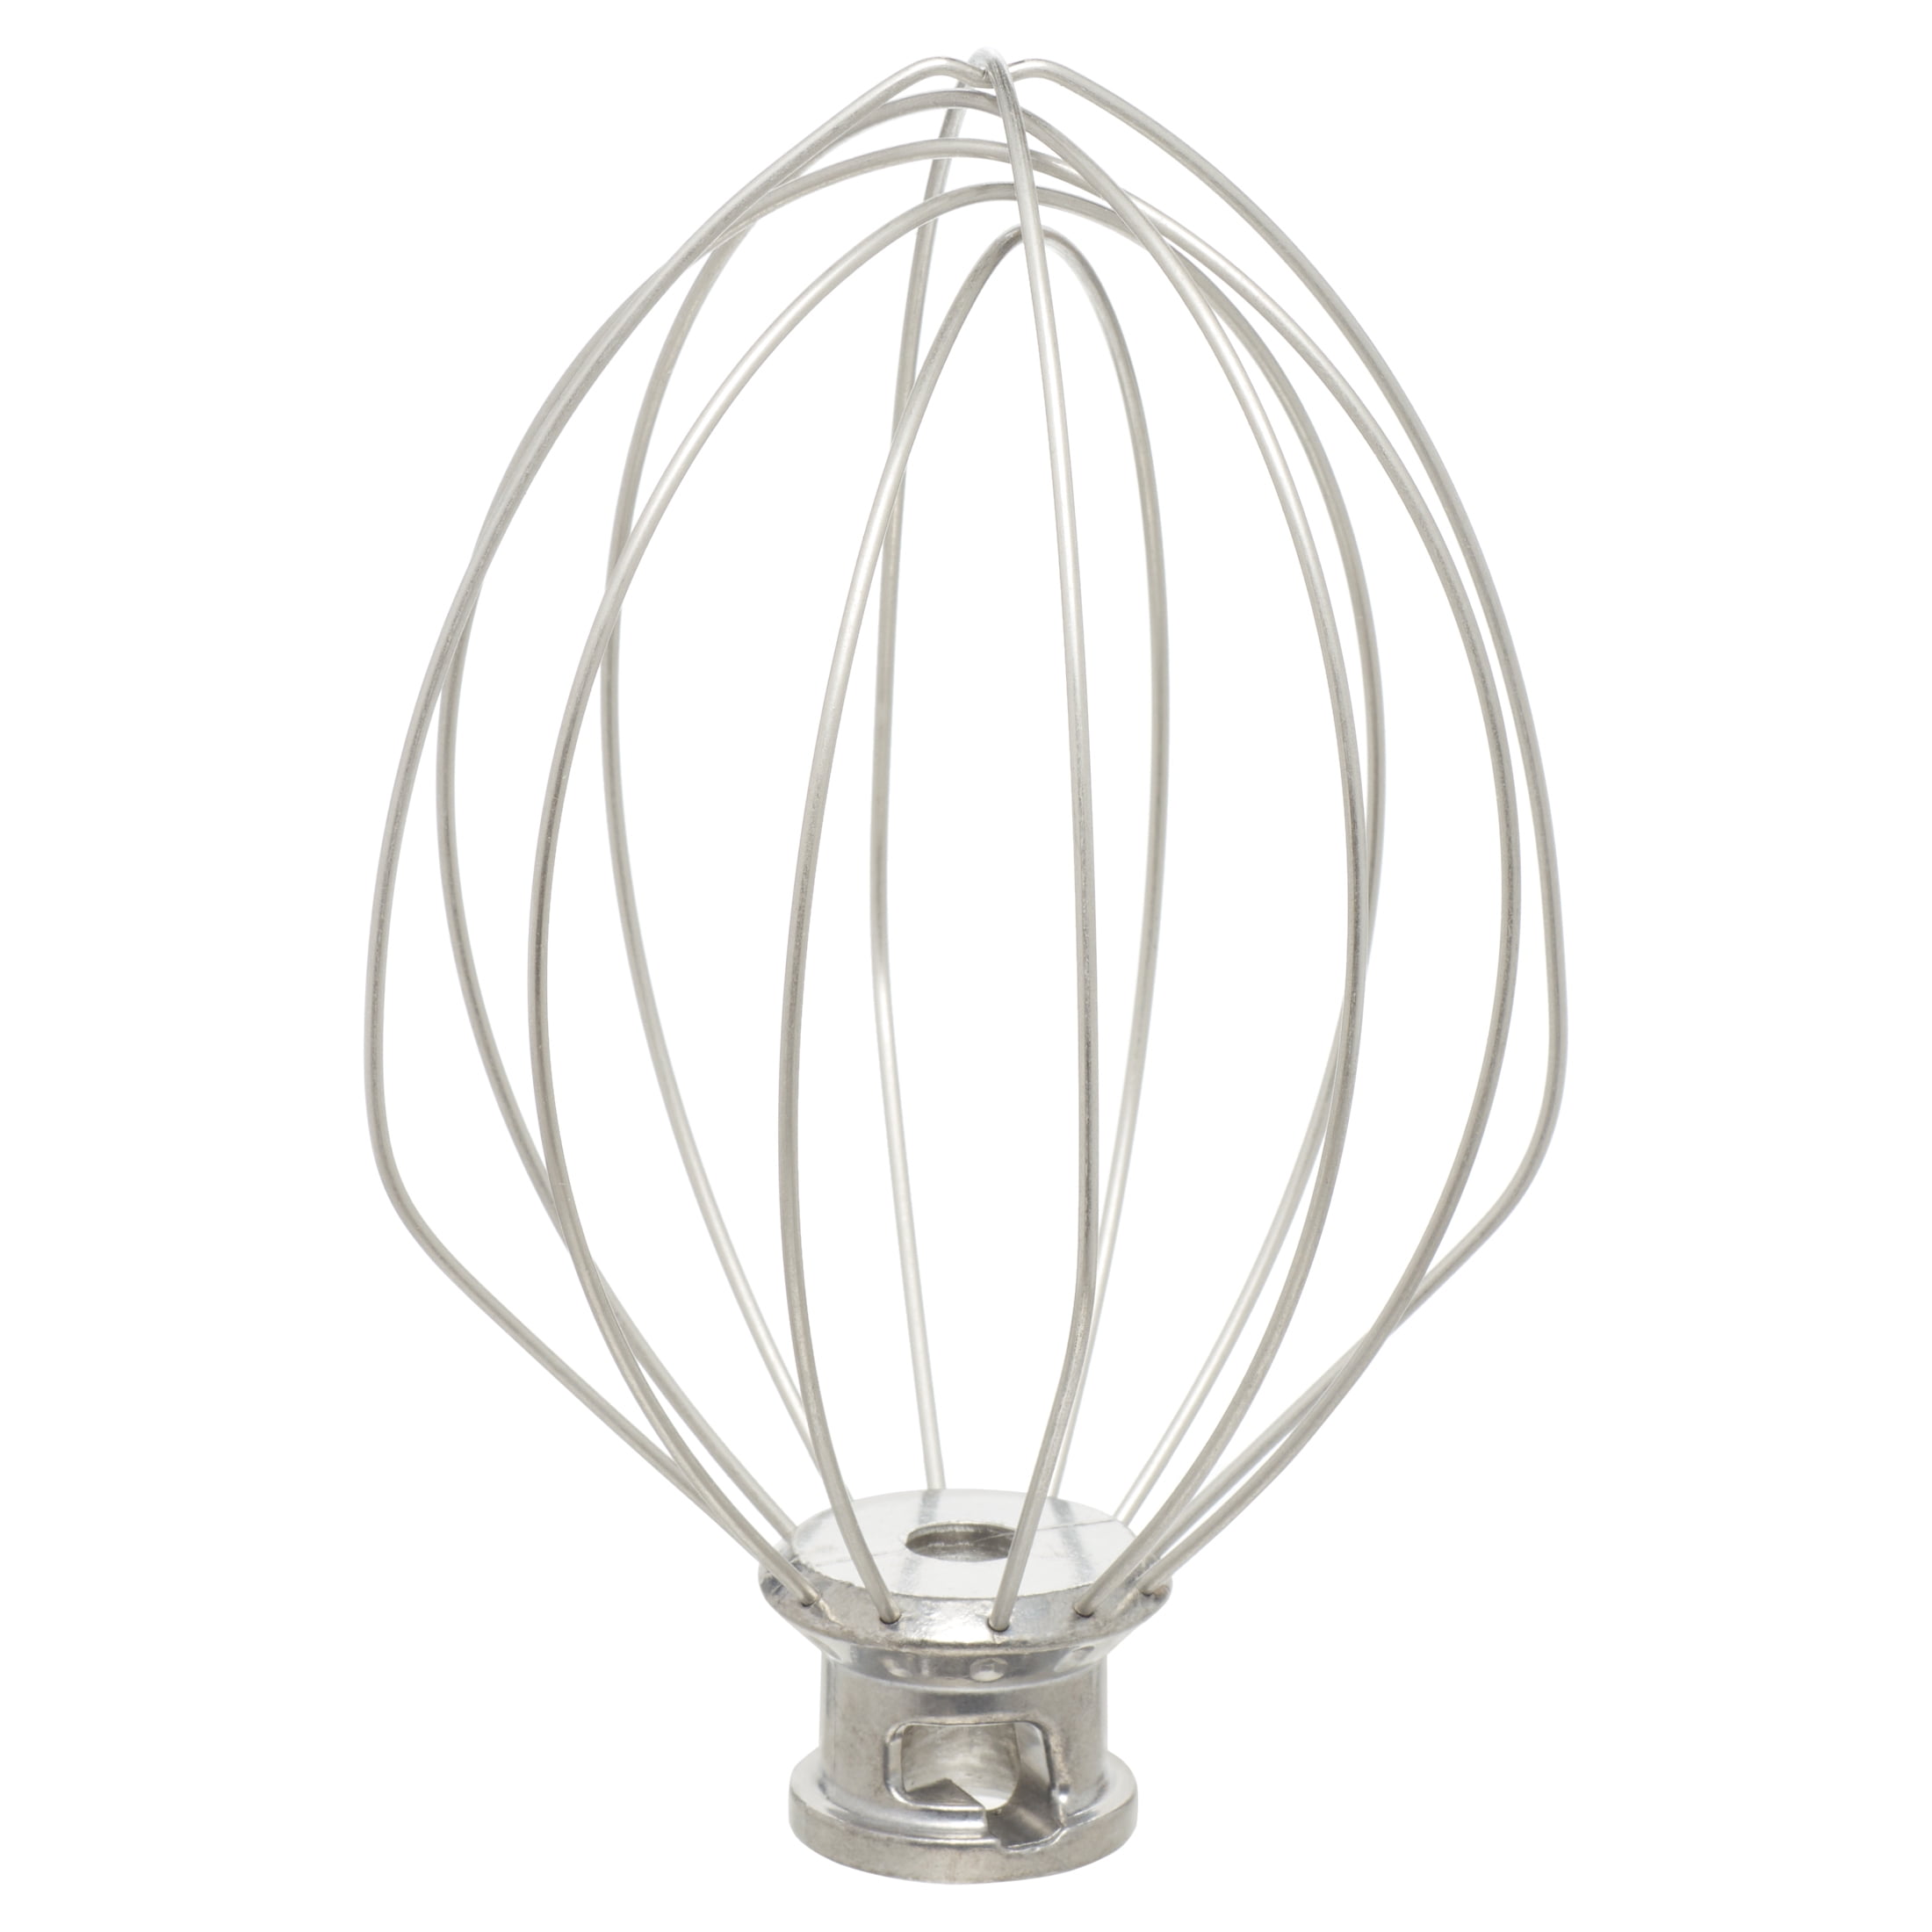 LETOMS Wire Whip for Kitchenaid Stand Mixer 5QT Lift and 6QT, Whisk  Attachment for Kitchenaid Mixer, Stainless Steel Egg Cream Stirrer